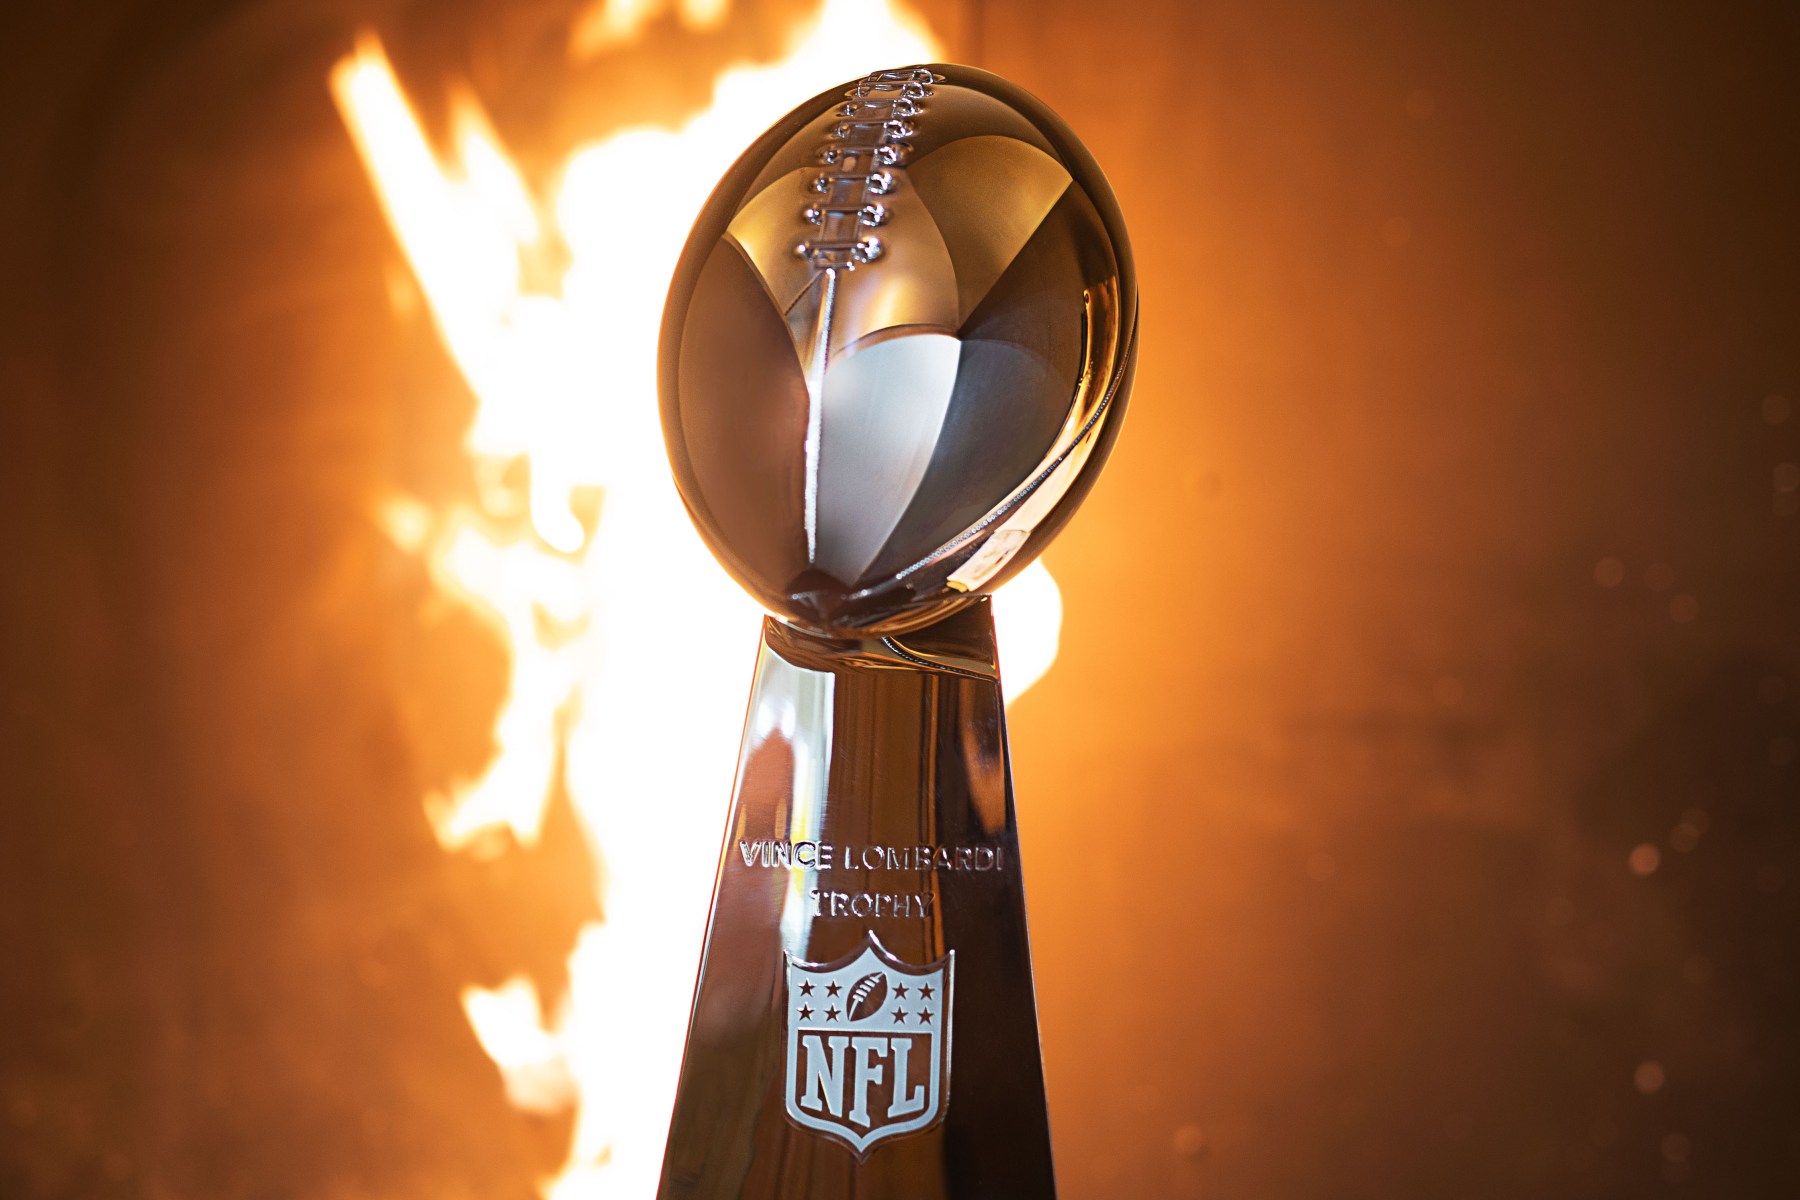 Did you know that Tiffany makes the Vince Lombardi Trophy? We didn't either.